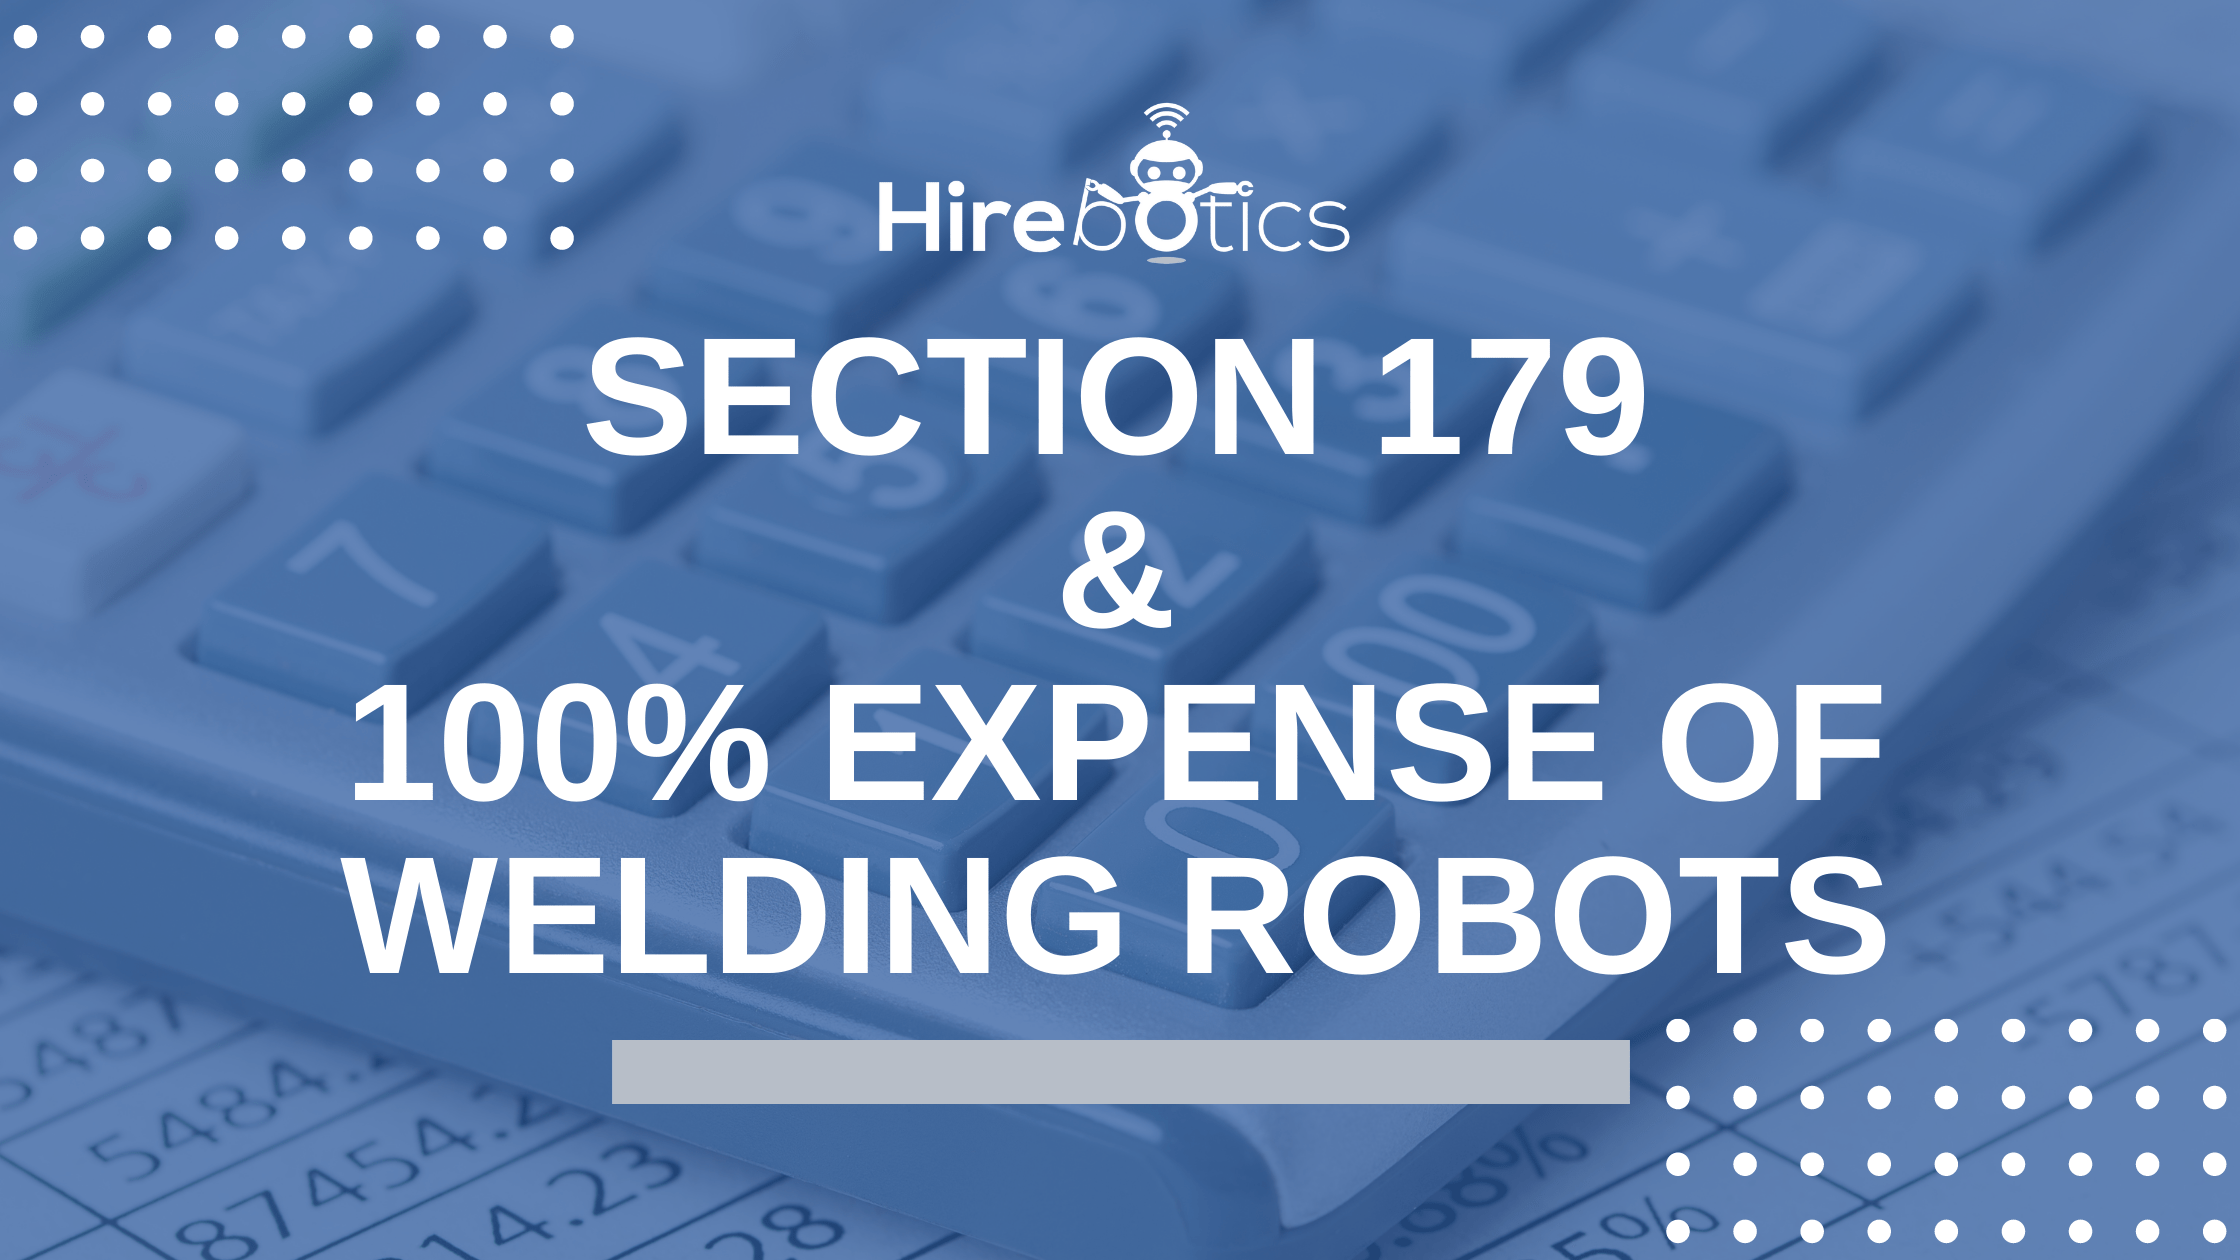 Section 179 Will Make You Expense 100% of Your Welding Robot